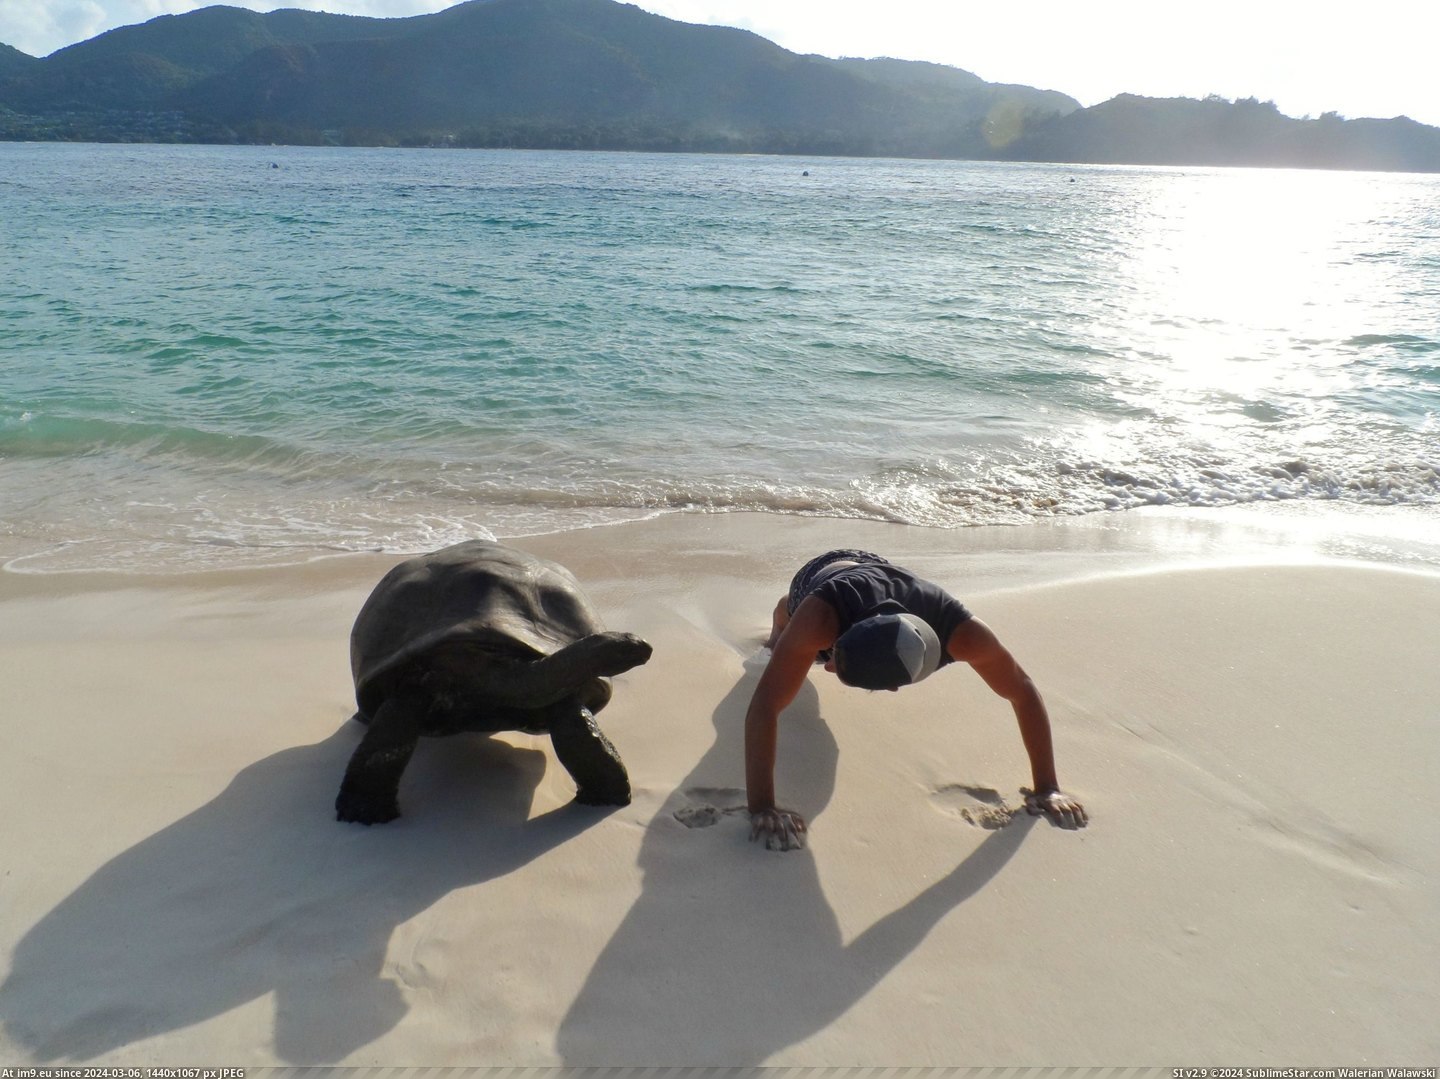 #Small #Island #Workout #Buddy #Boyfriend [Pics] Currently volunteering on a small island in the Seychelles - my boyfriend found a new workout buddy! Pic. (Image of album My r/PICS favs))